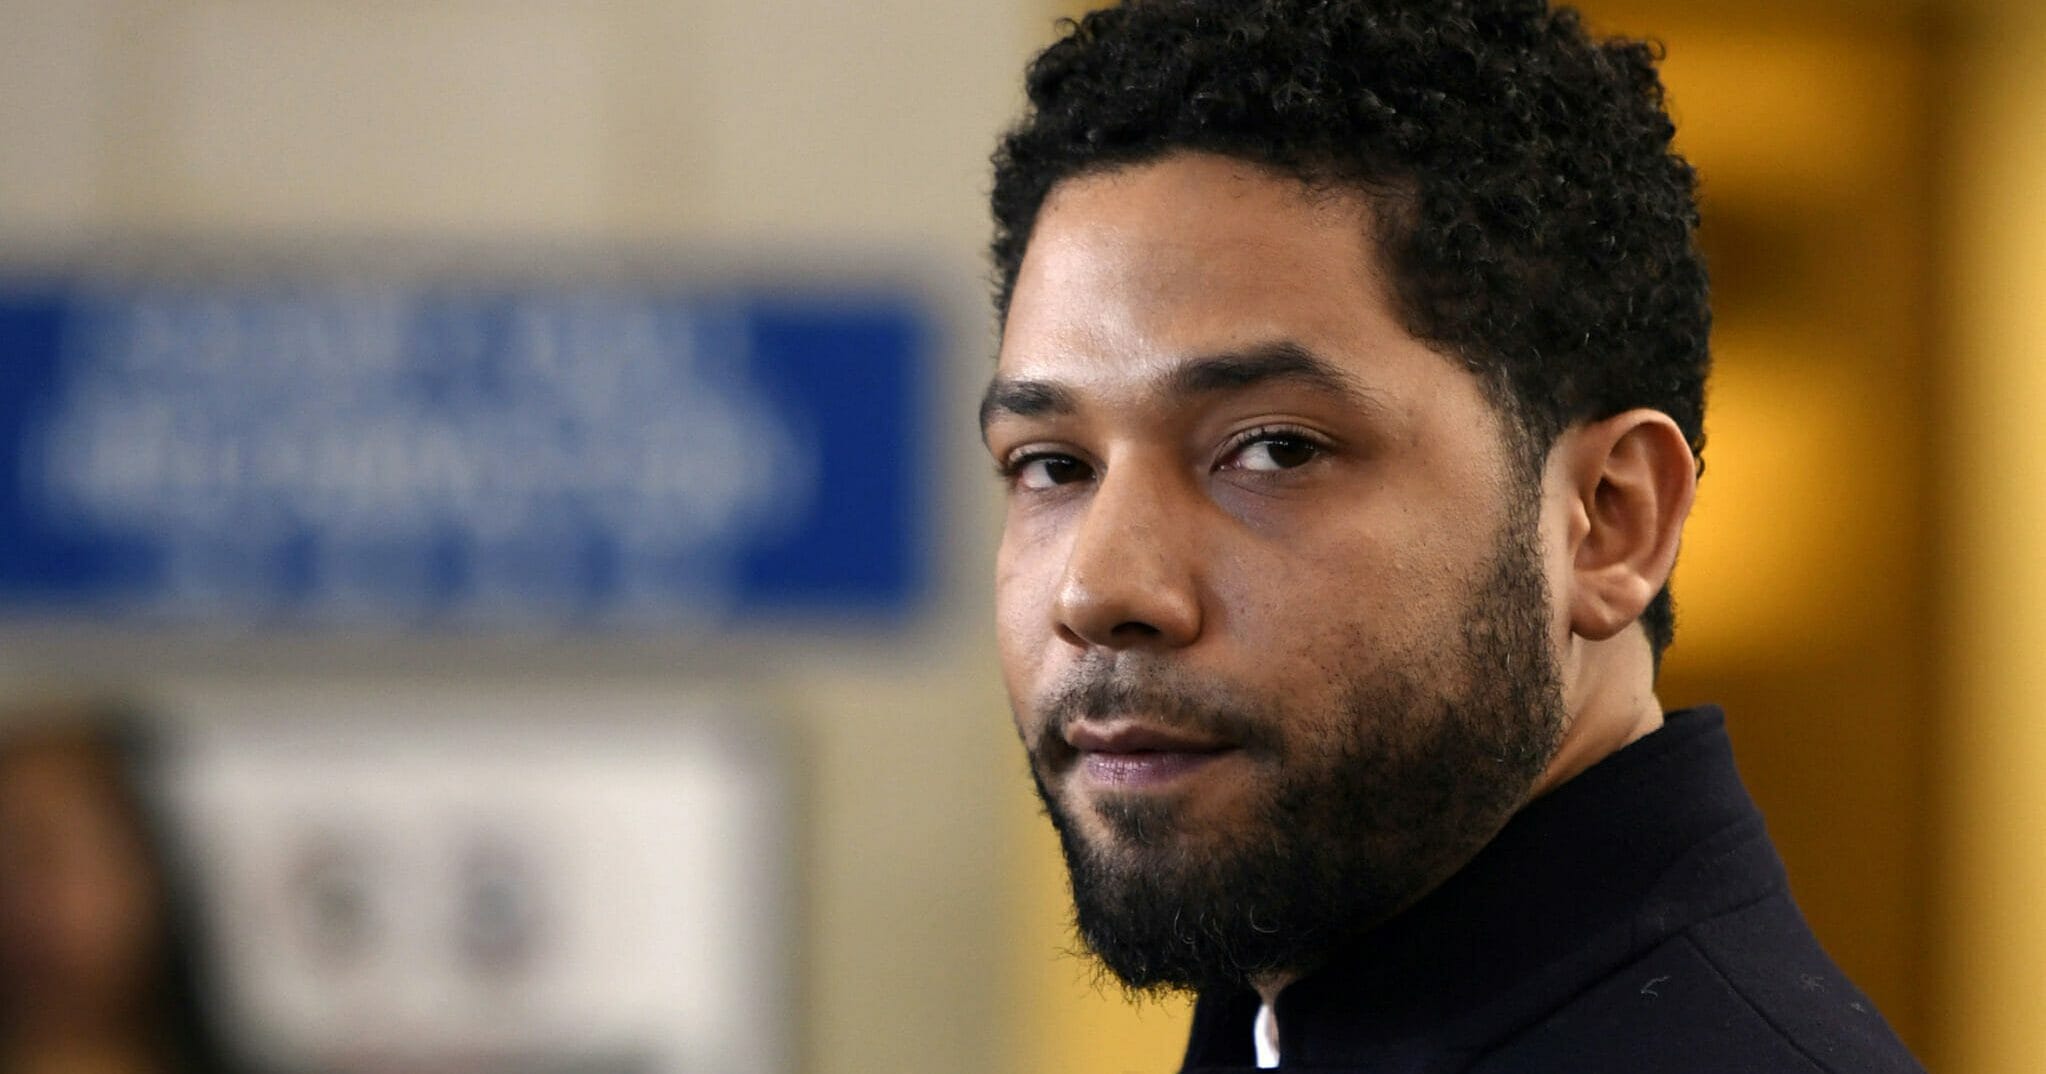 Actor Jussie Smollett talks to the media March 26, 2019, before leaving Cook County Court in Chicago.